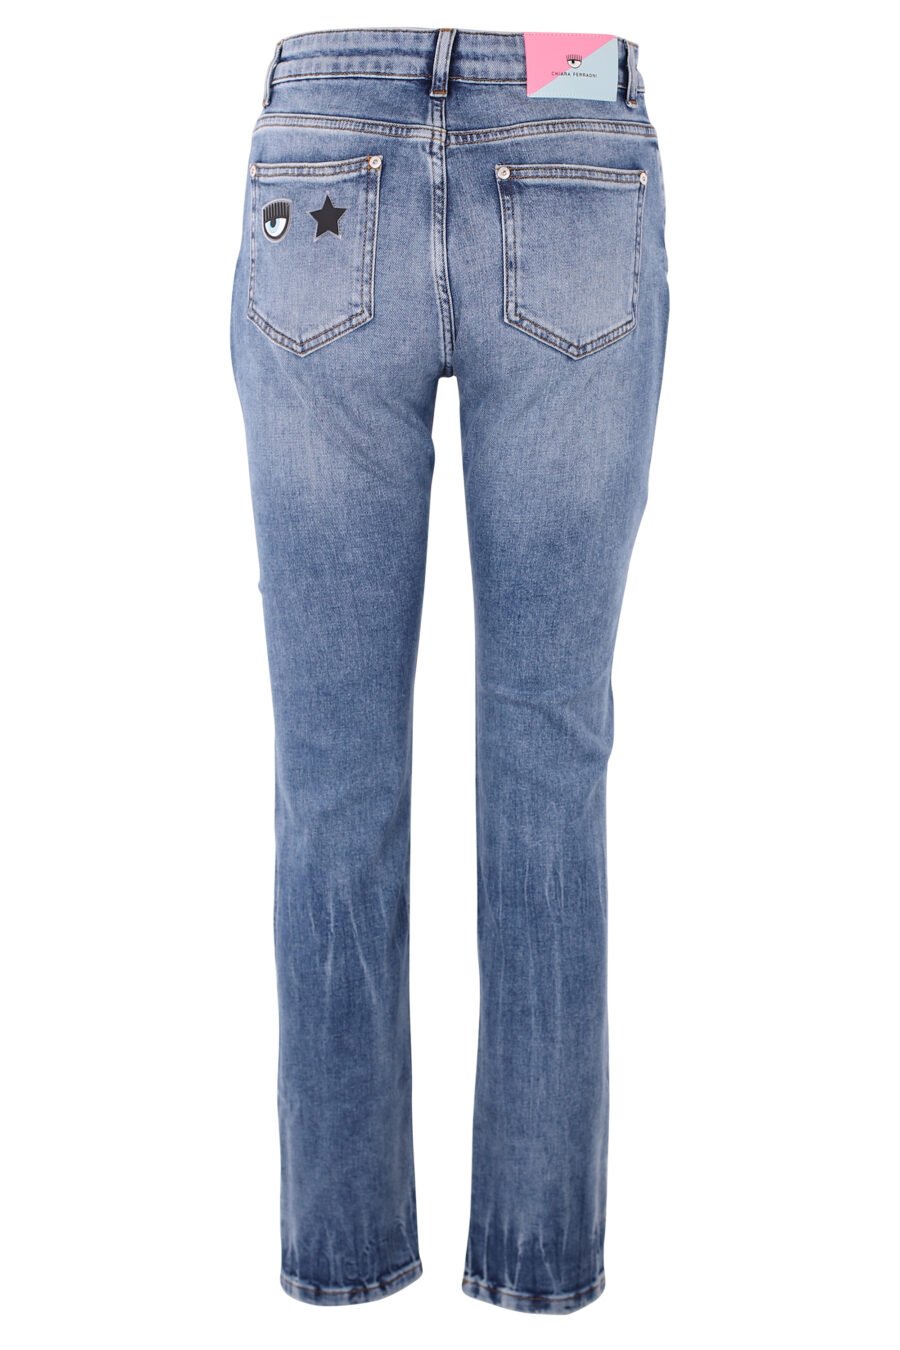 Blue denim trousers with eye and star logo - IMG 6322